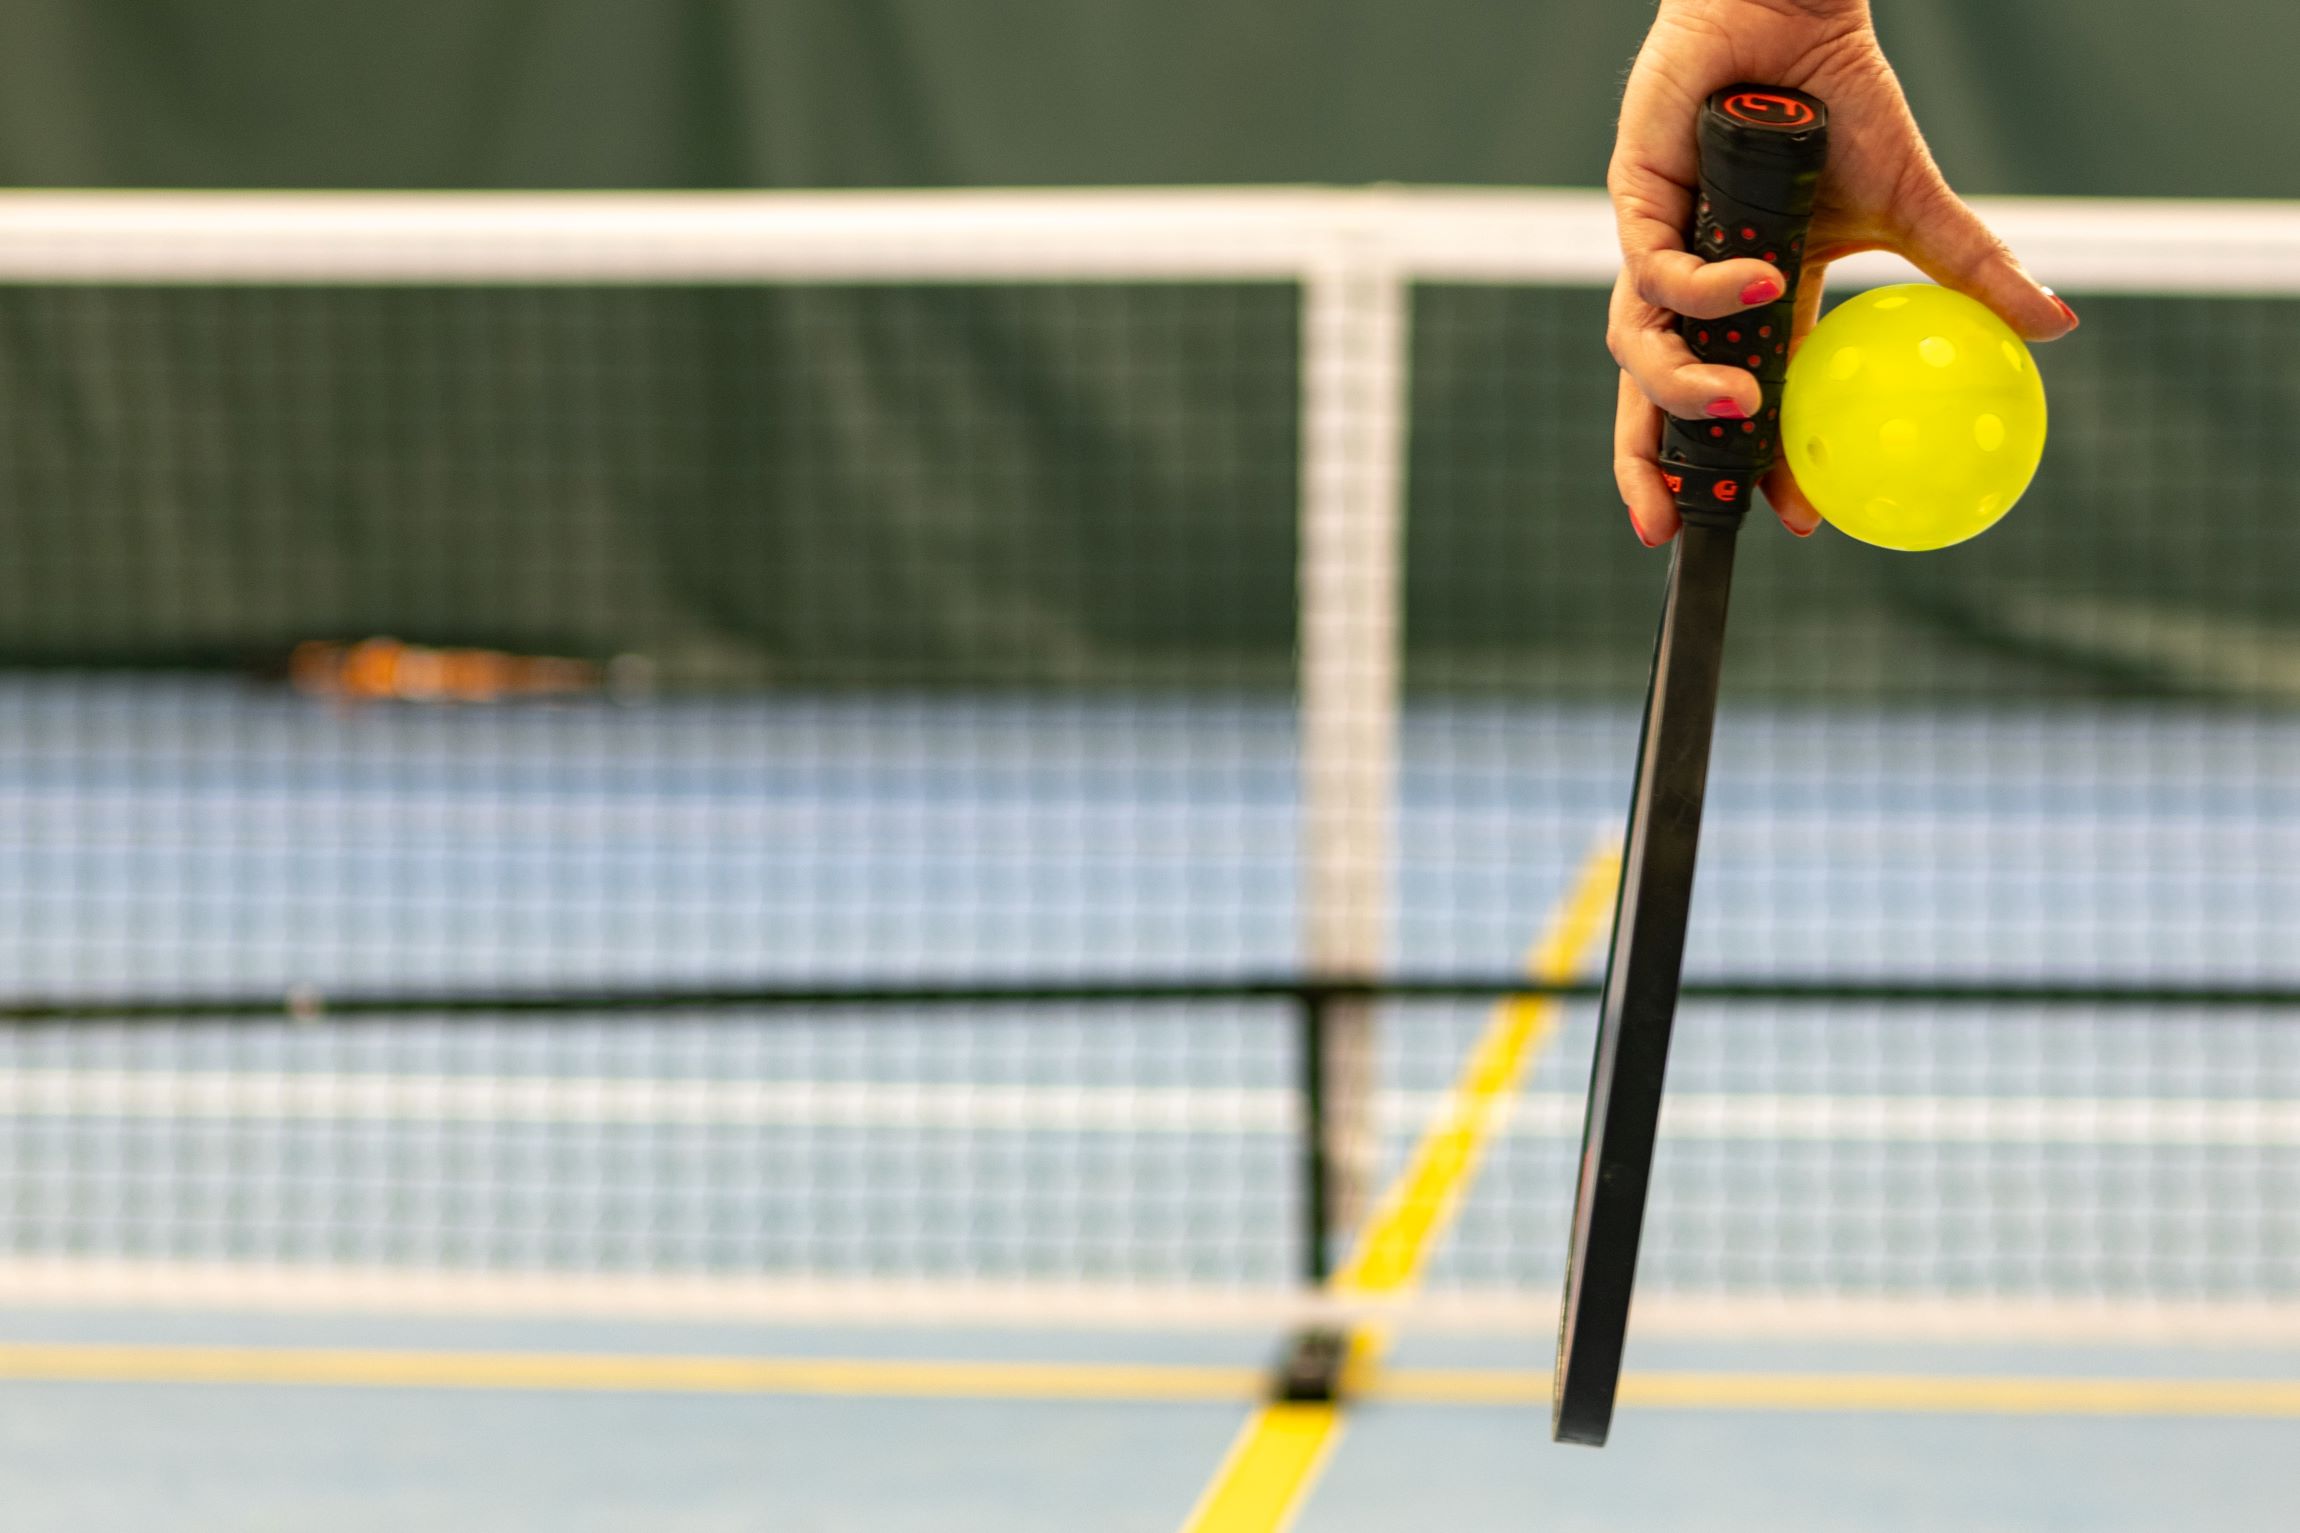 An image of a hand holding a pickleball racquet and ball.